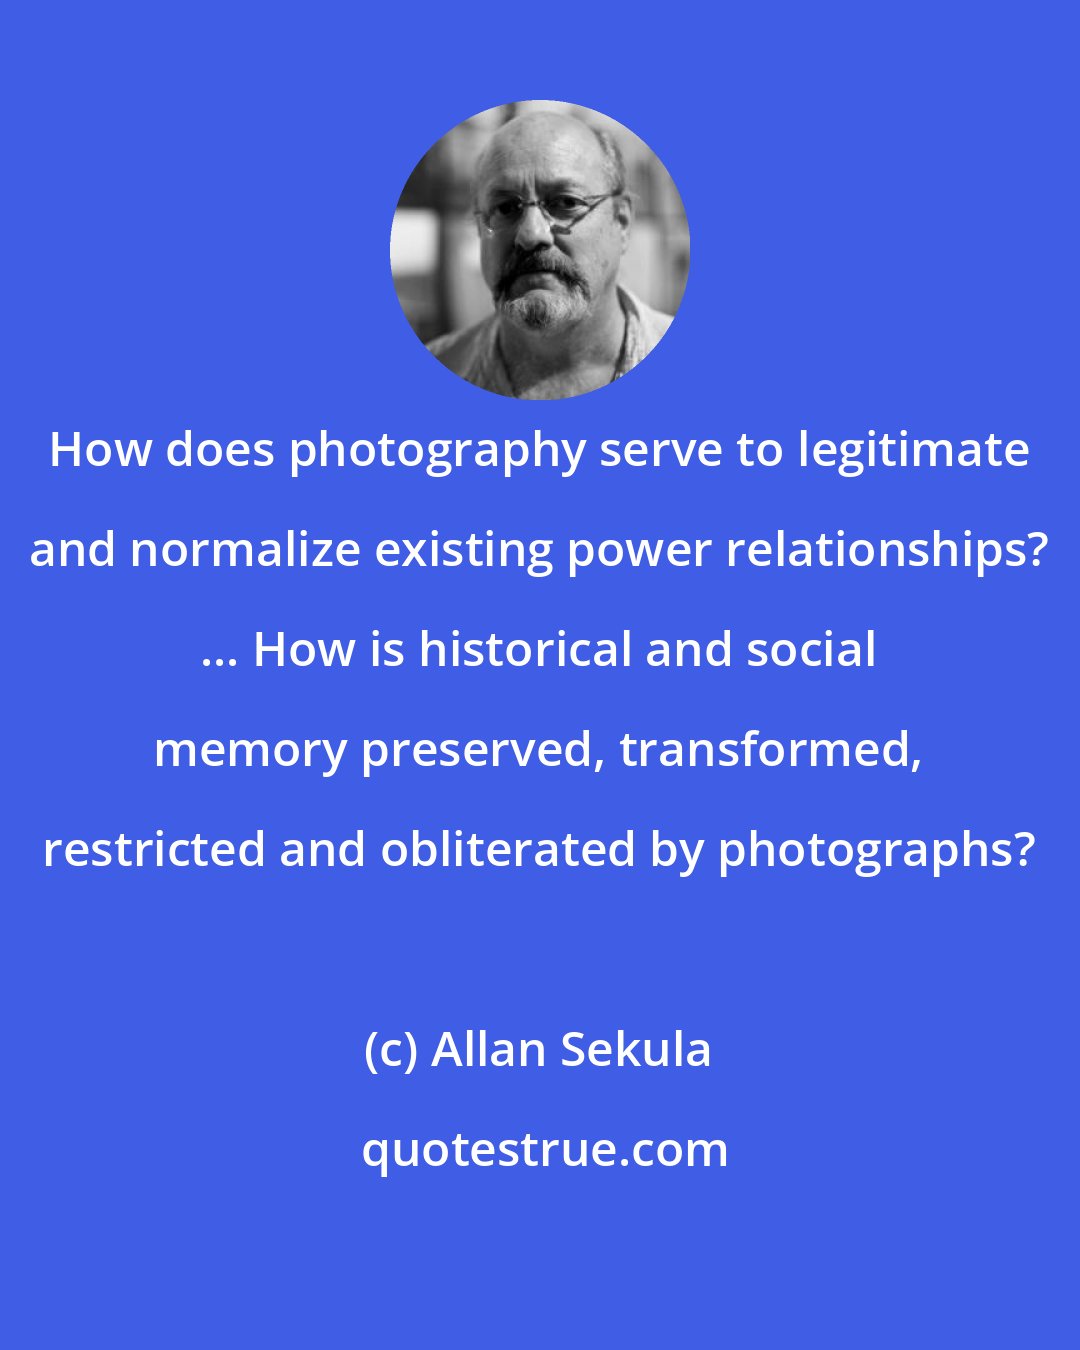 Allan Sekula: How does photography serve to legitimate and normalize existing power relationships? ... How is historical and social memory preserved, transformed, restricted and obliterated by photographs?